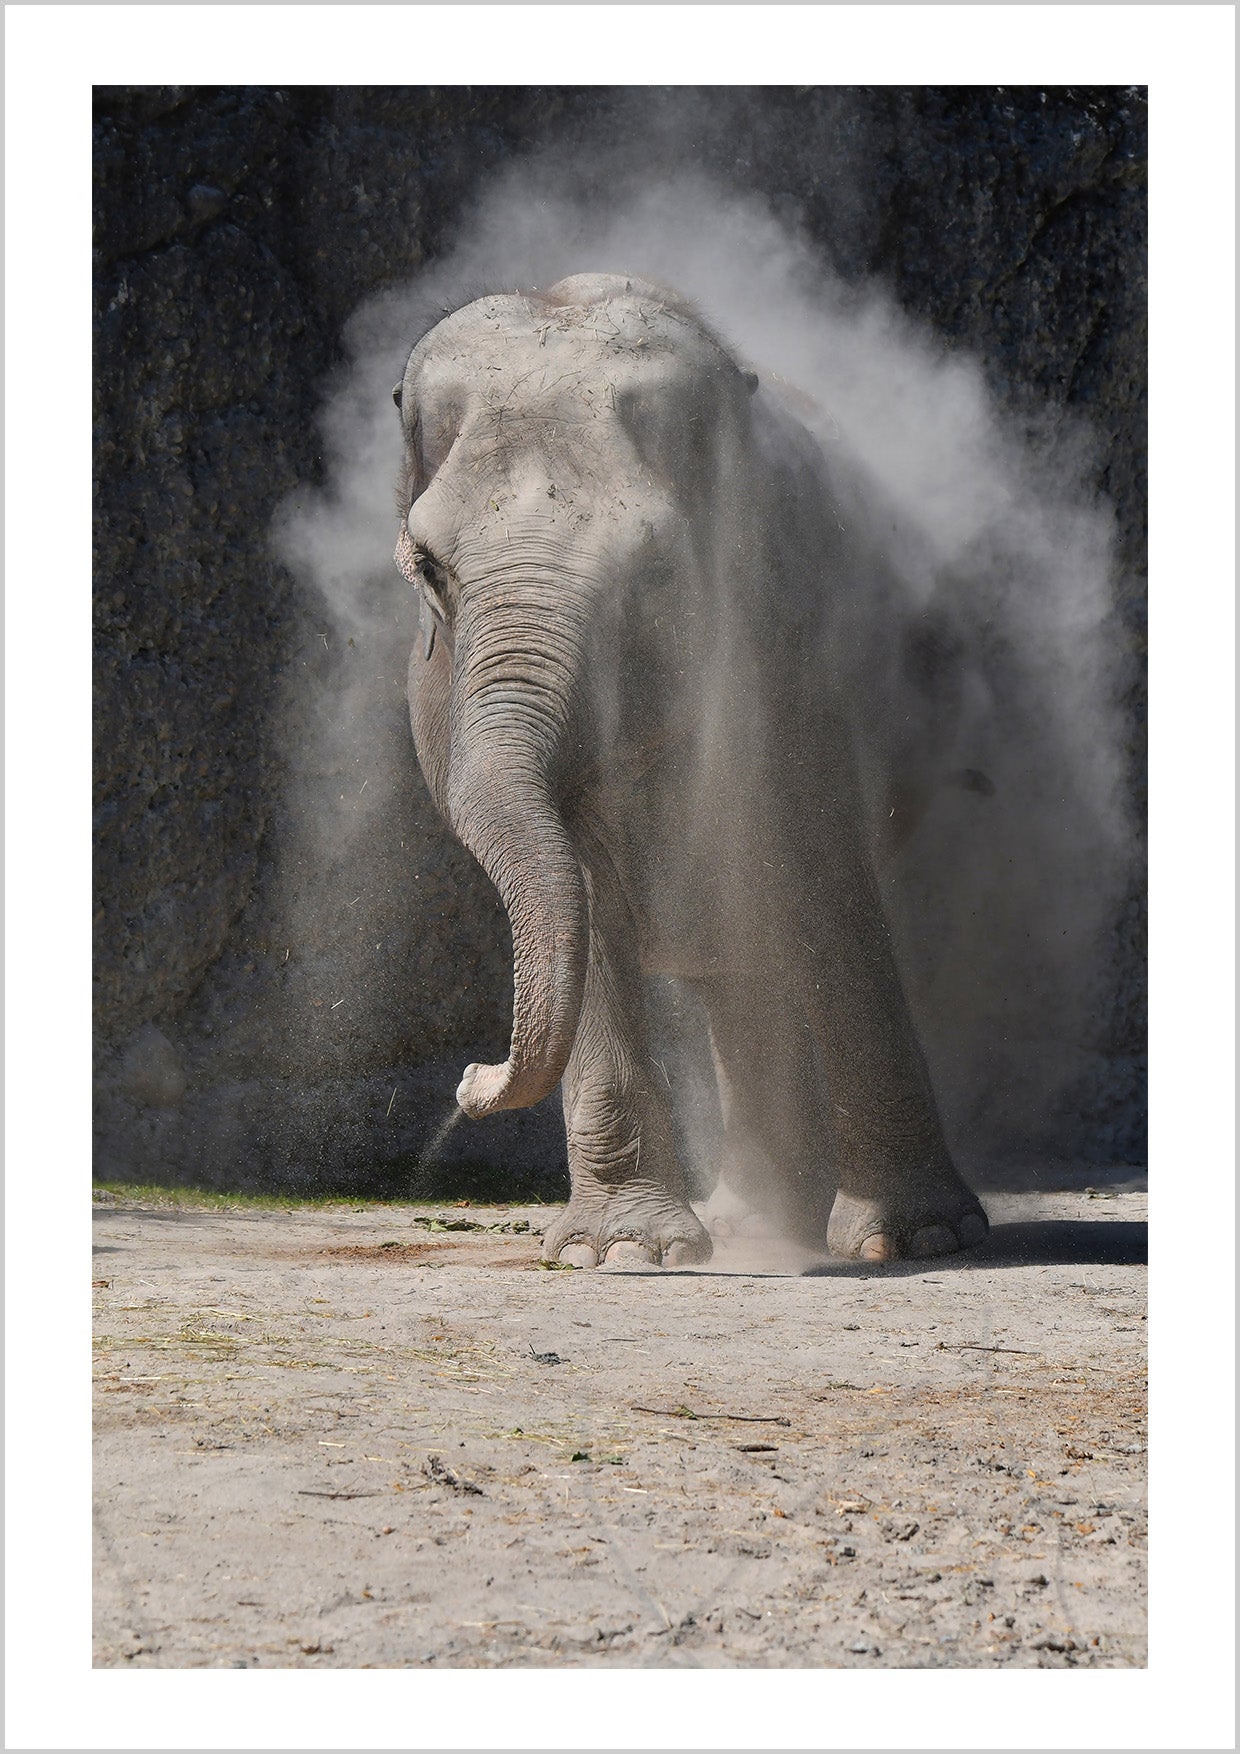 Black and white photography Poster of an elephant walking in the dust.